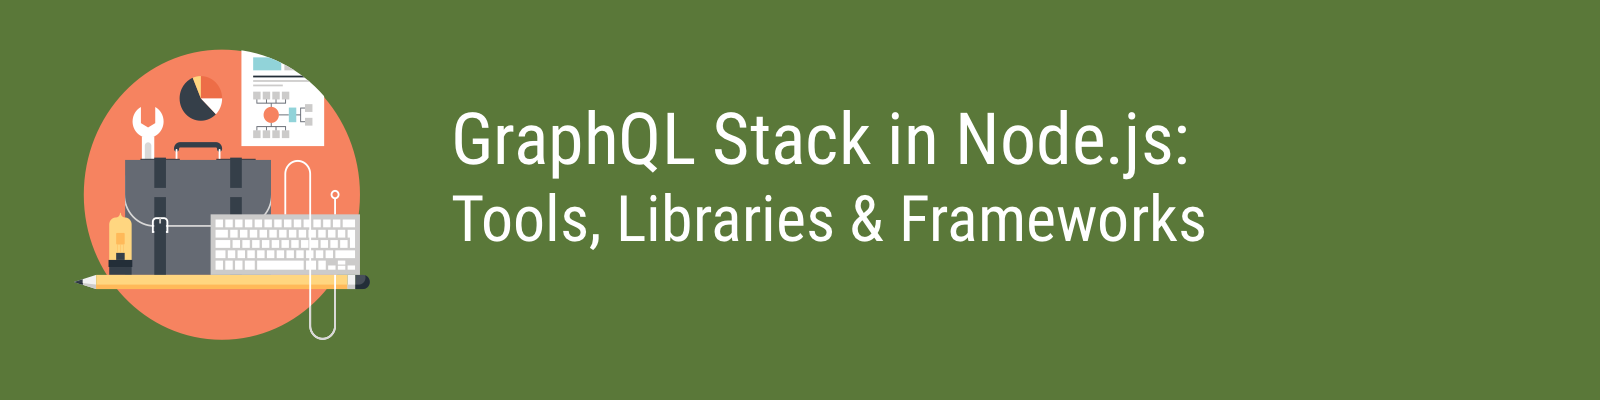 GraphQL Stack in Node.js: Tools, Libraries, and Frameworks Explained and Compared